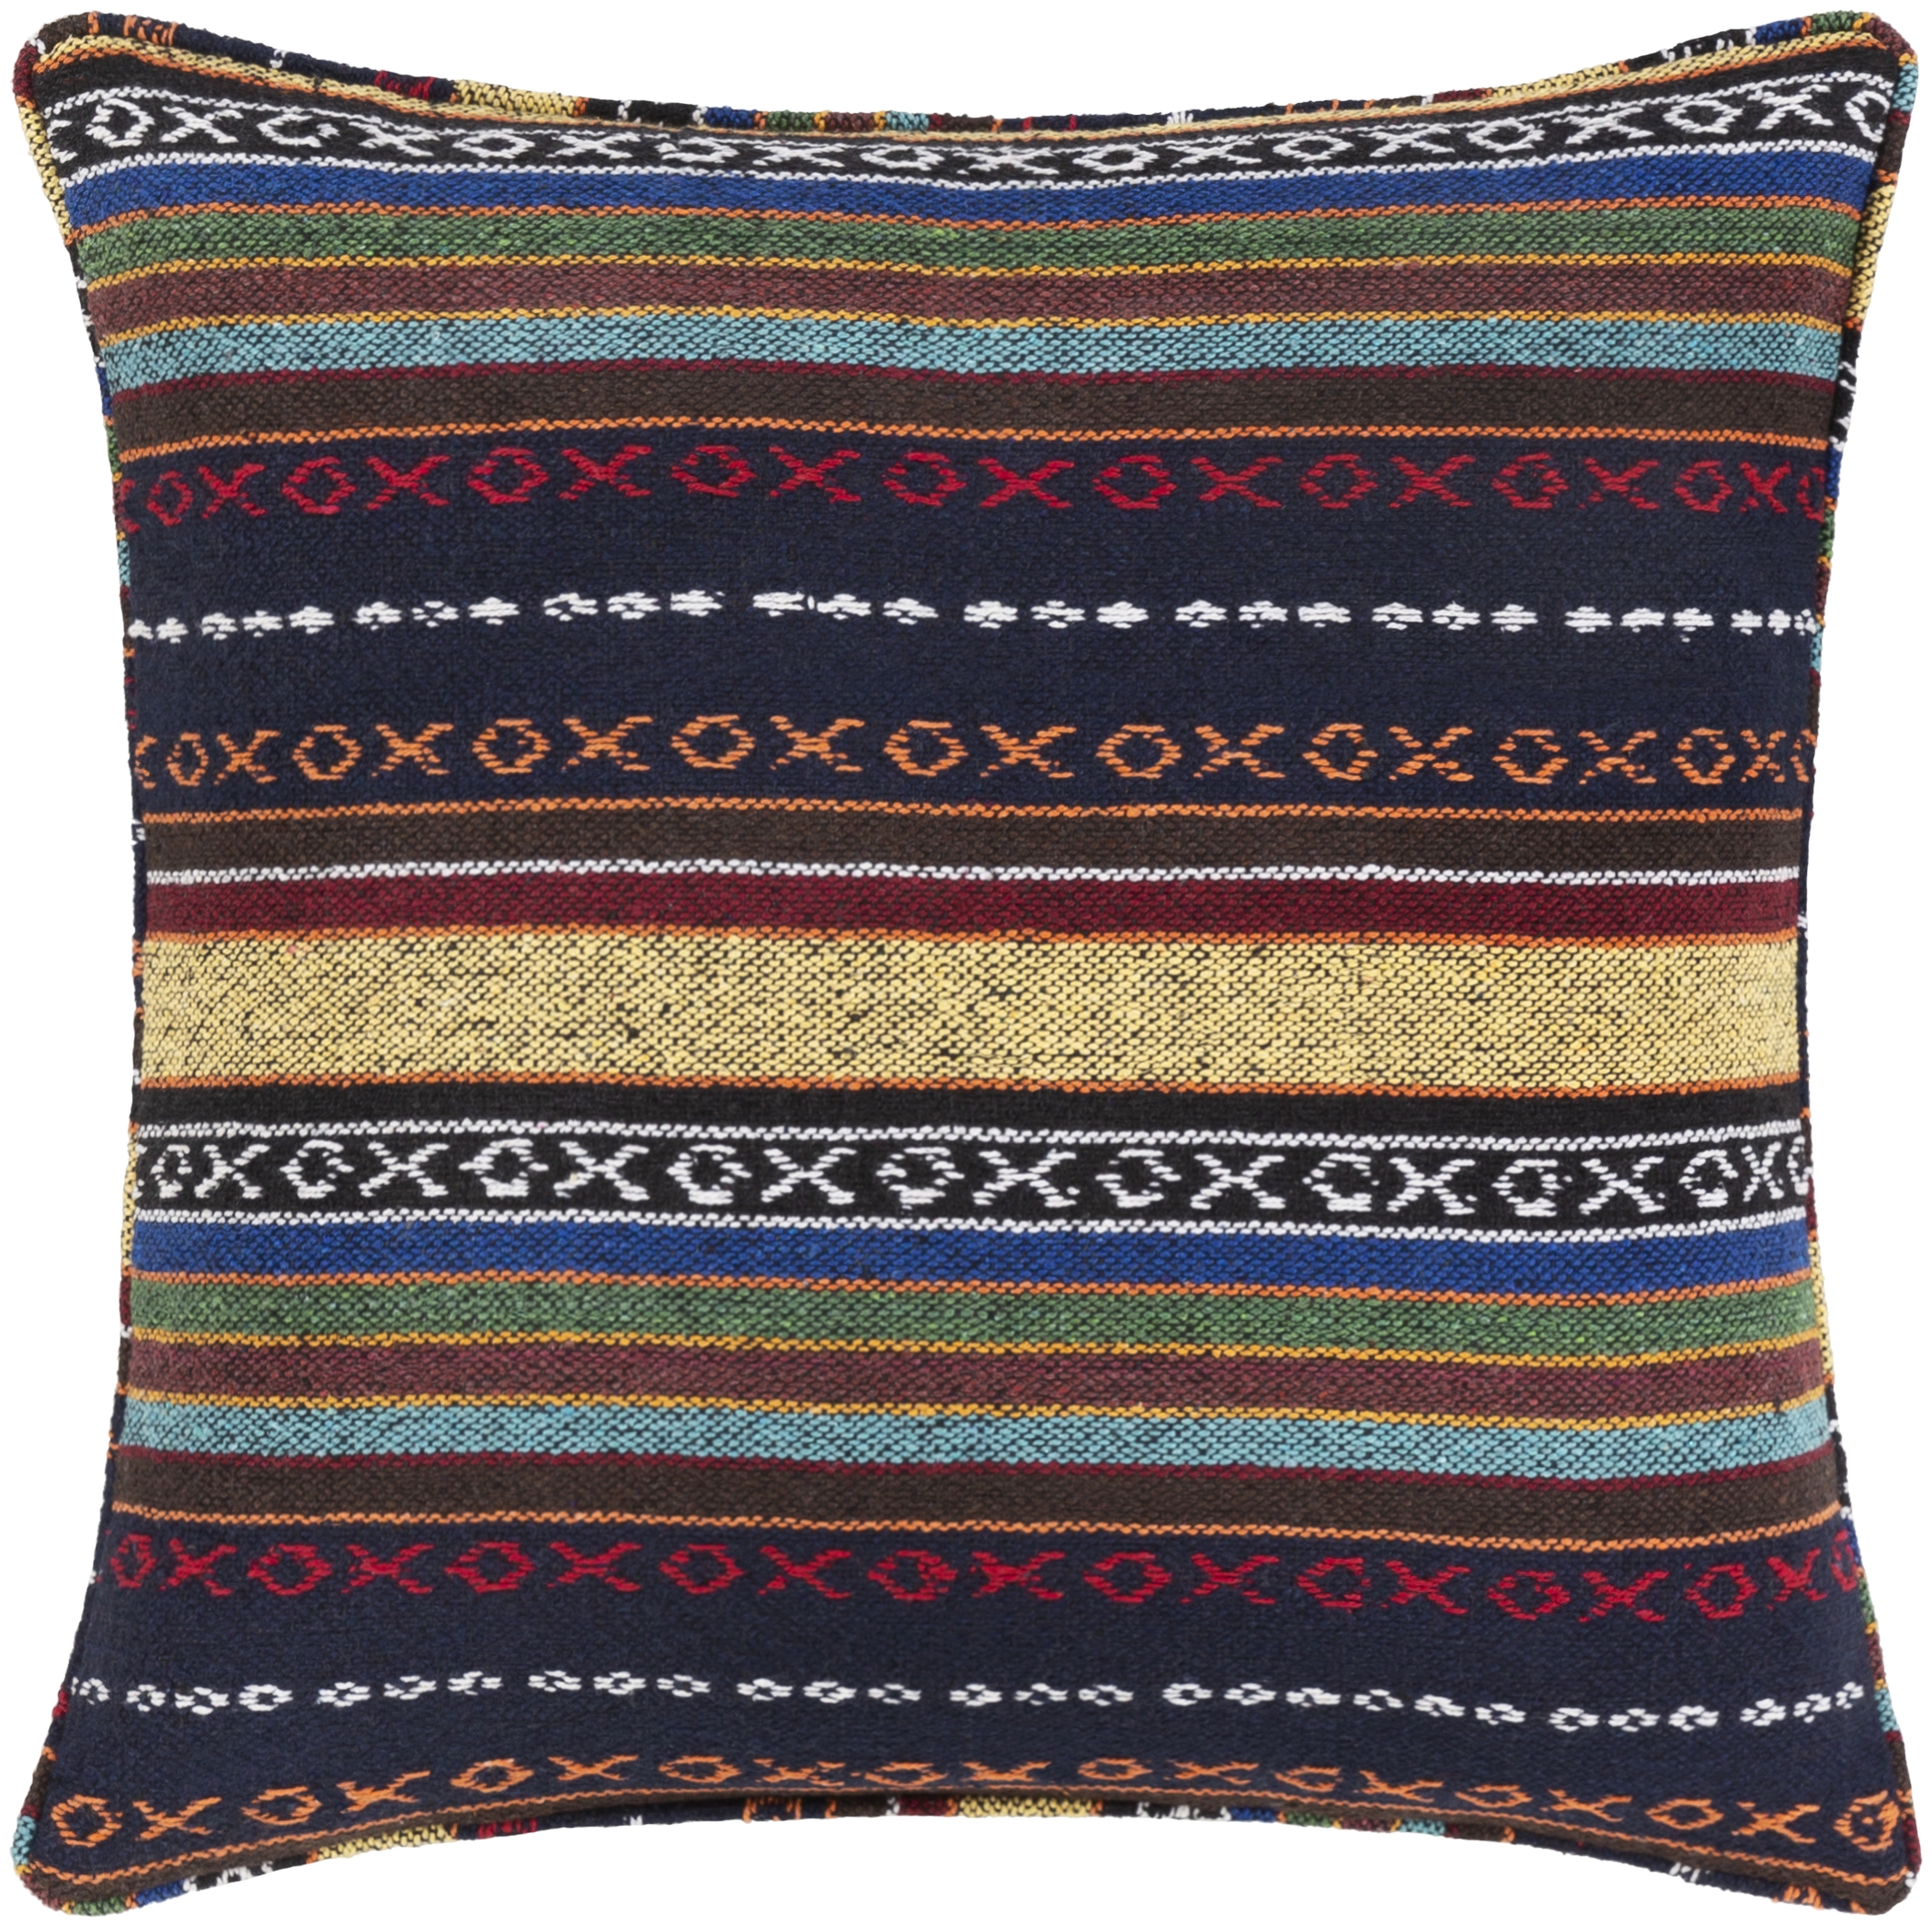 Maya - MYP-004 - 18" x 18" - pillow cover only - Image 0